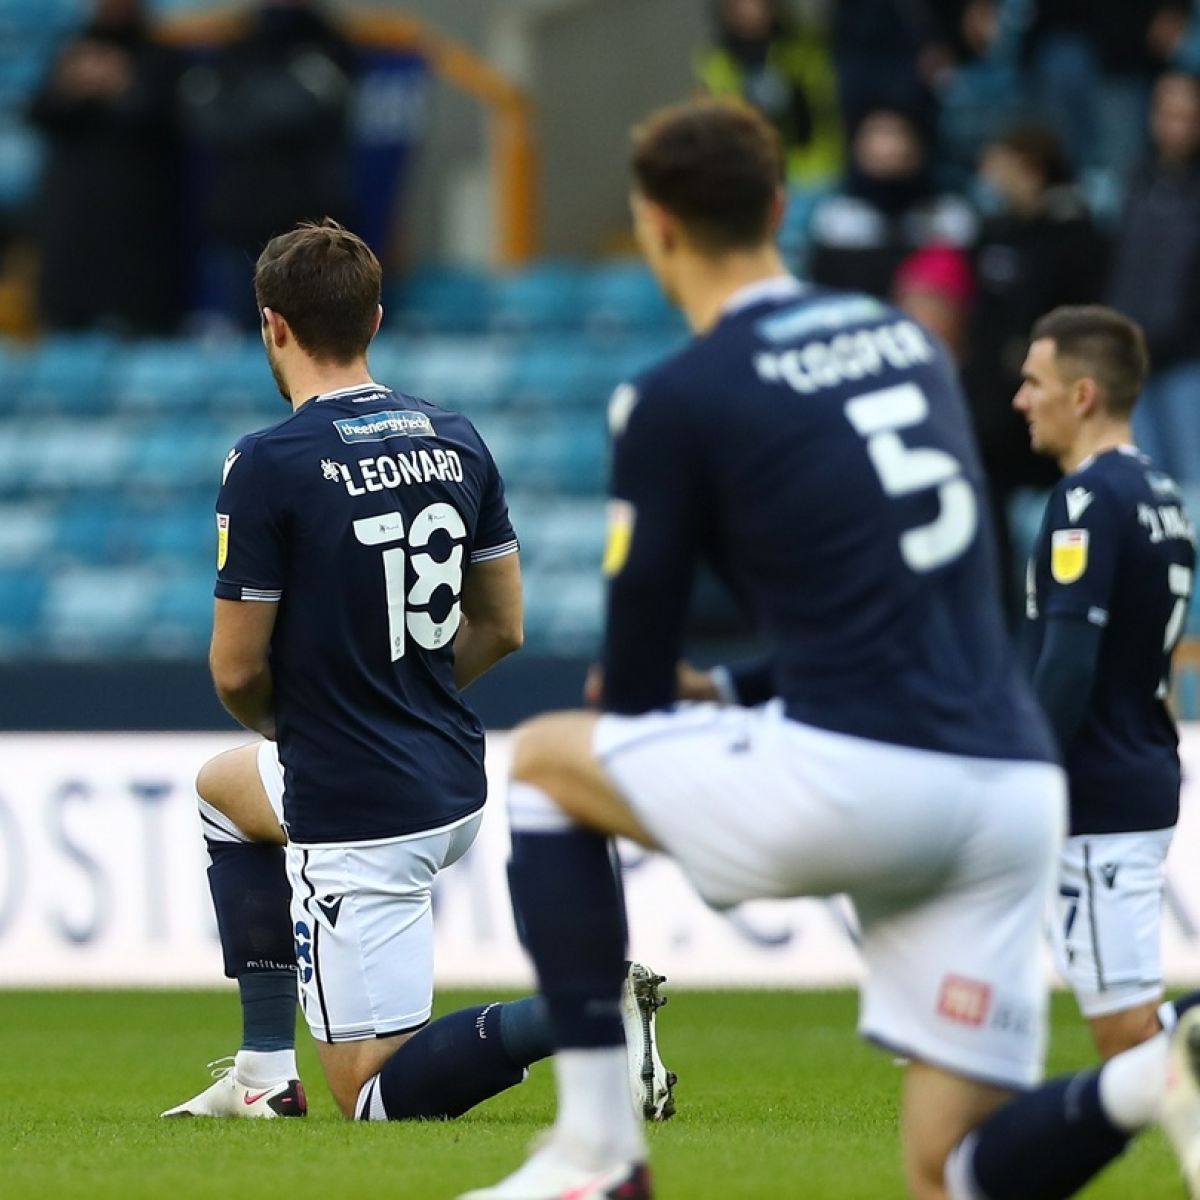 Fa Condemns Millwall Fans For Booing Players As They Take A Knee